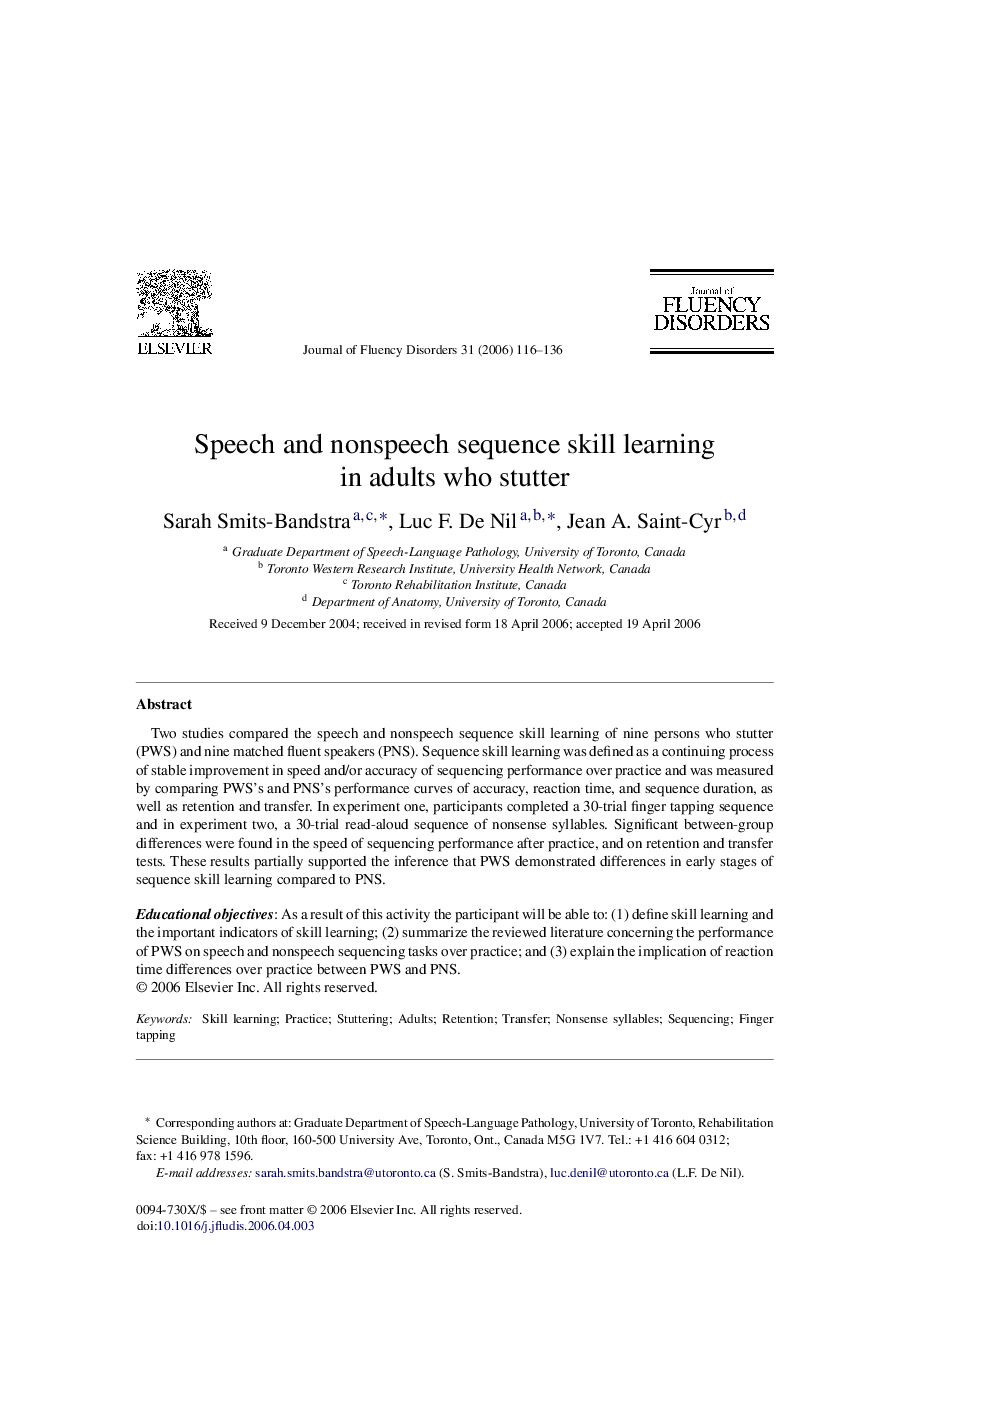 Speech and nonspeech sequence skill learning in adults who stutter